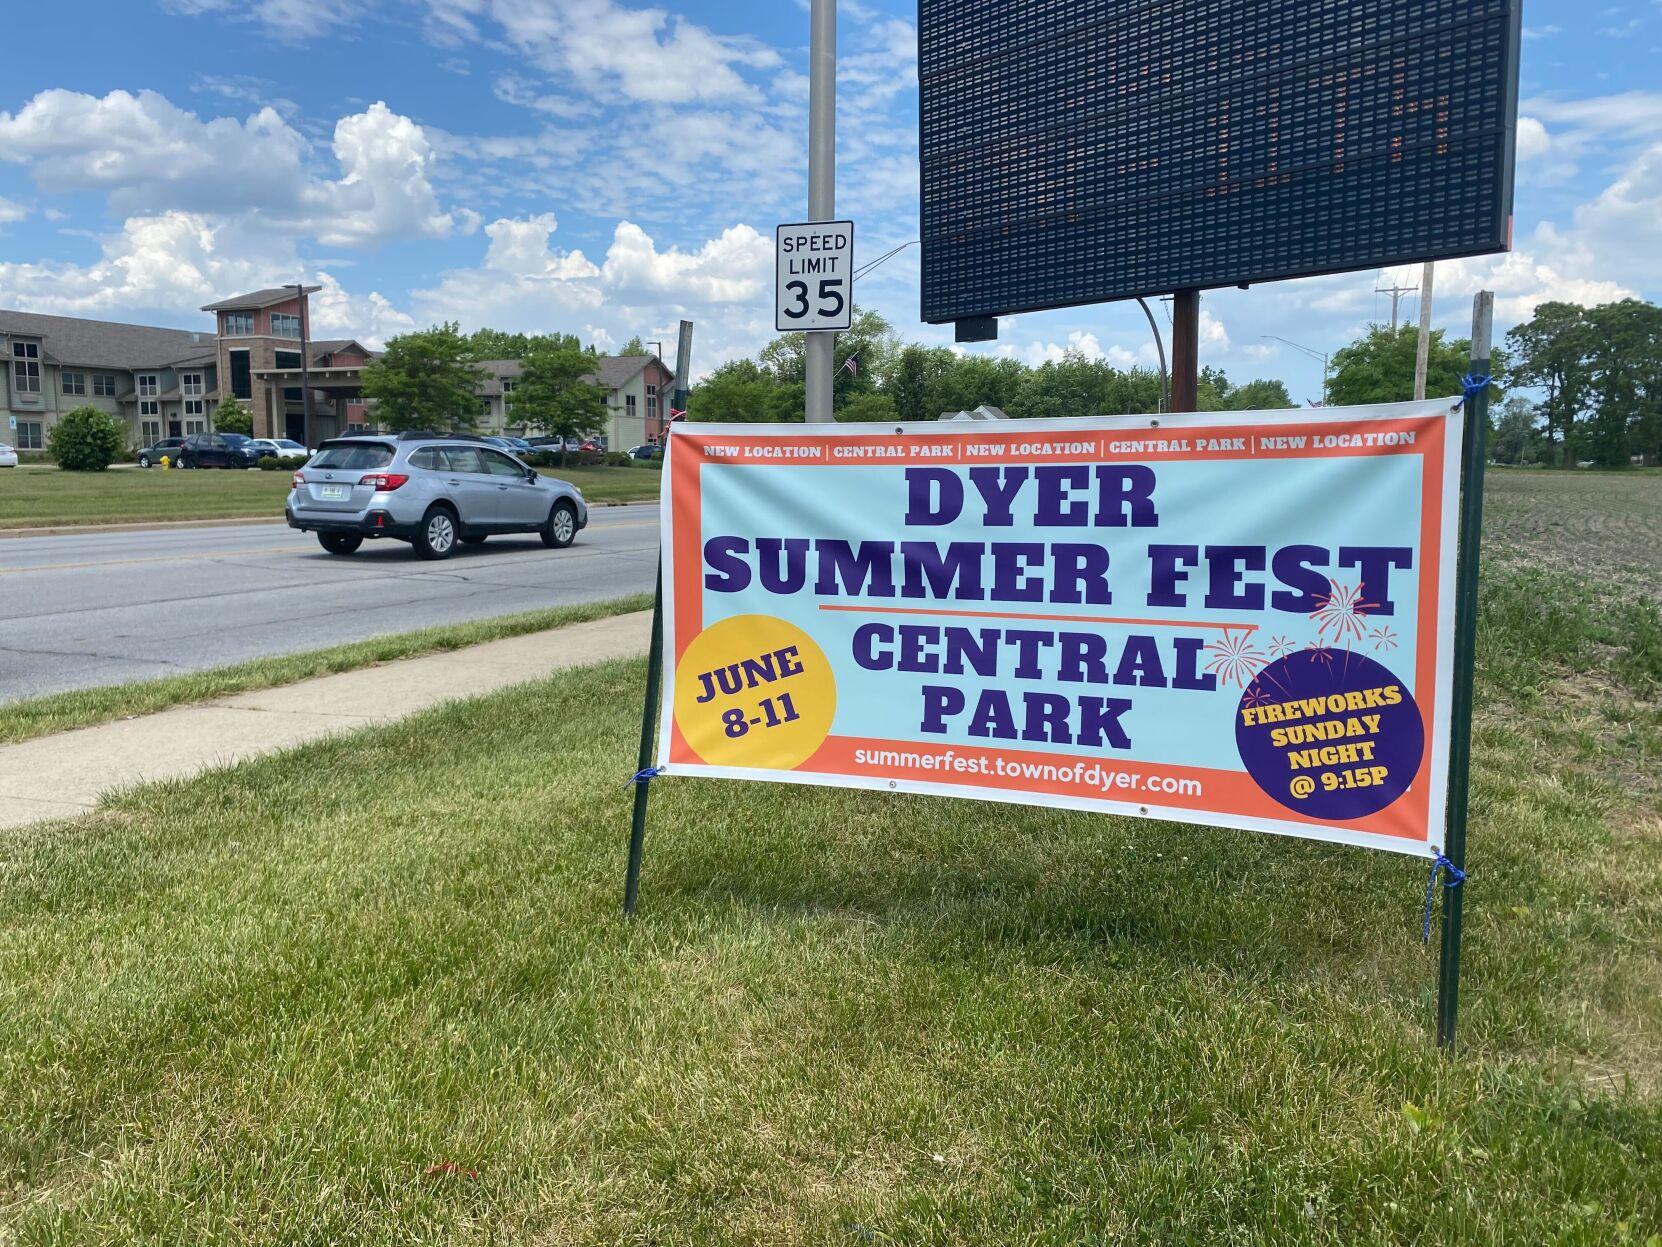 Dyer Summer Fest expands to new location